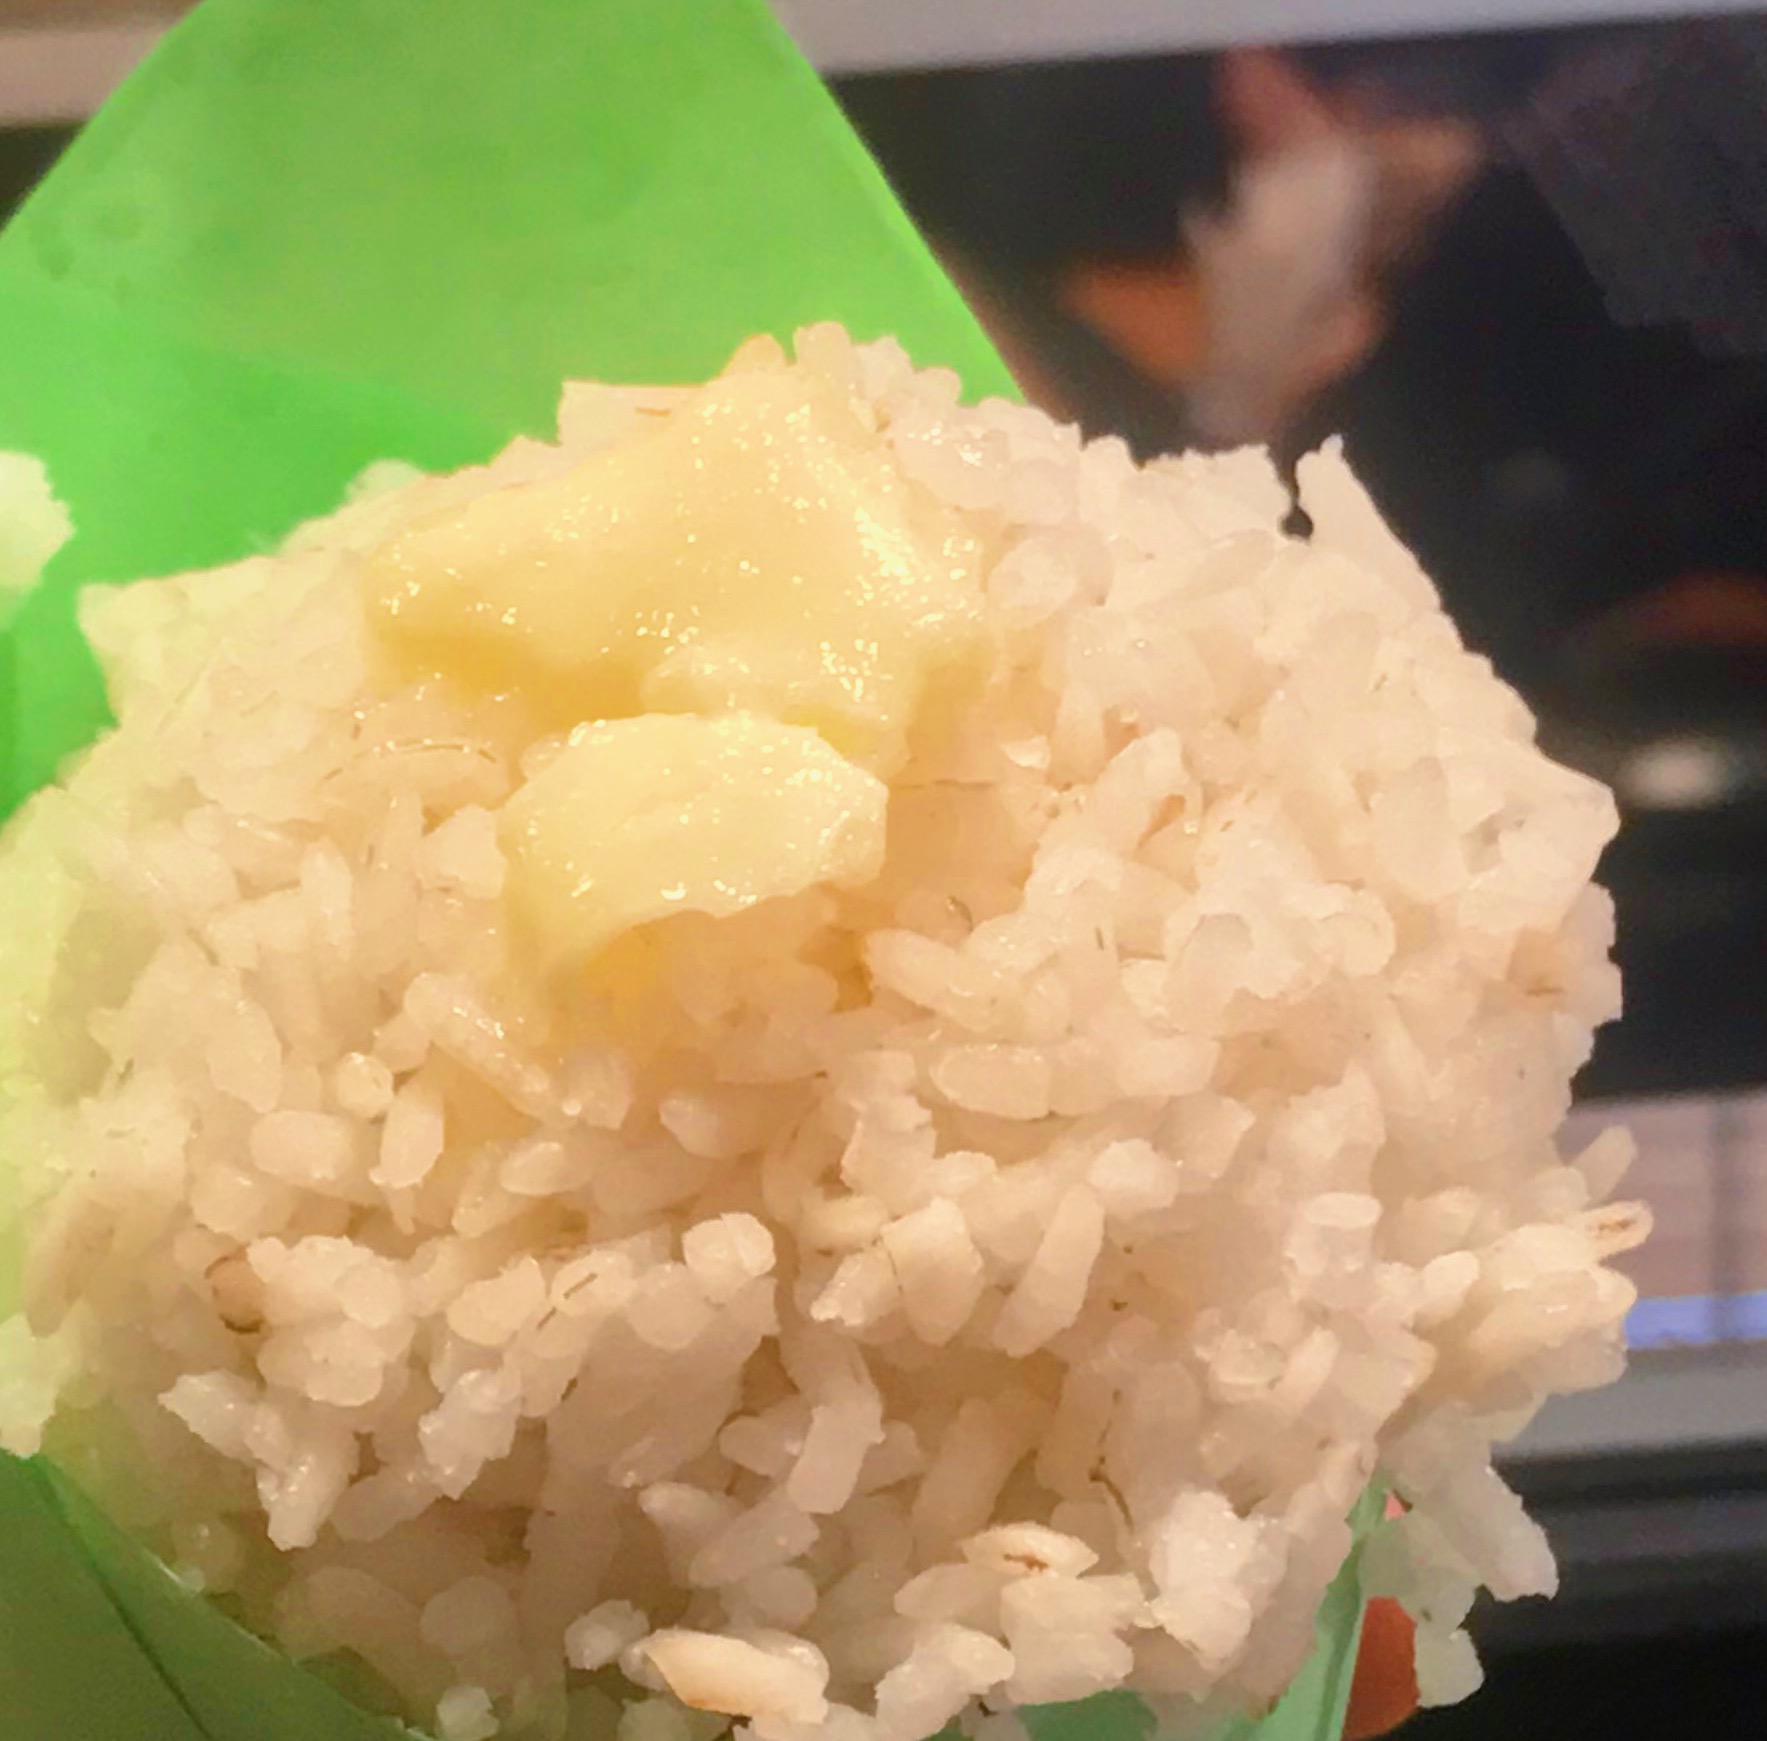 A scoop of Carolina Gold rice with butter melting into it.